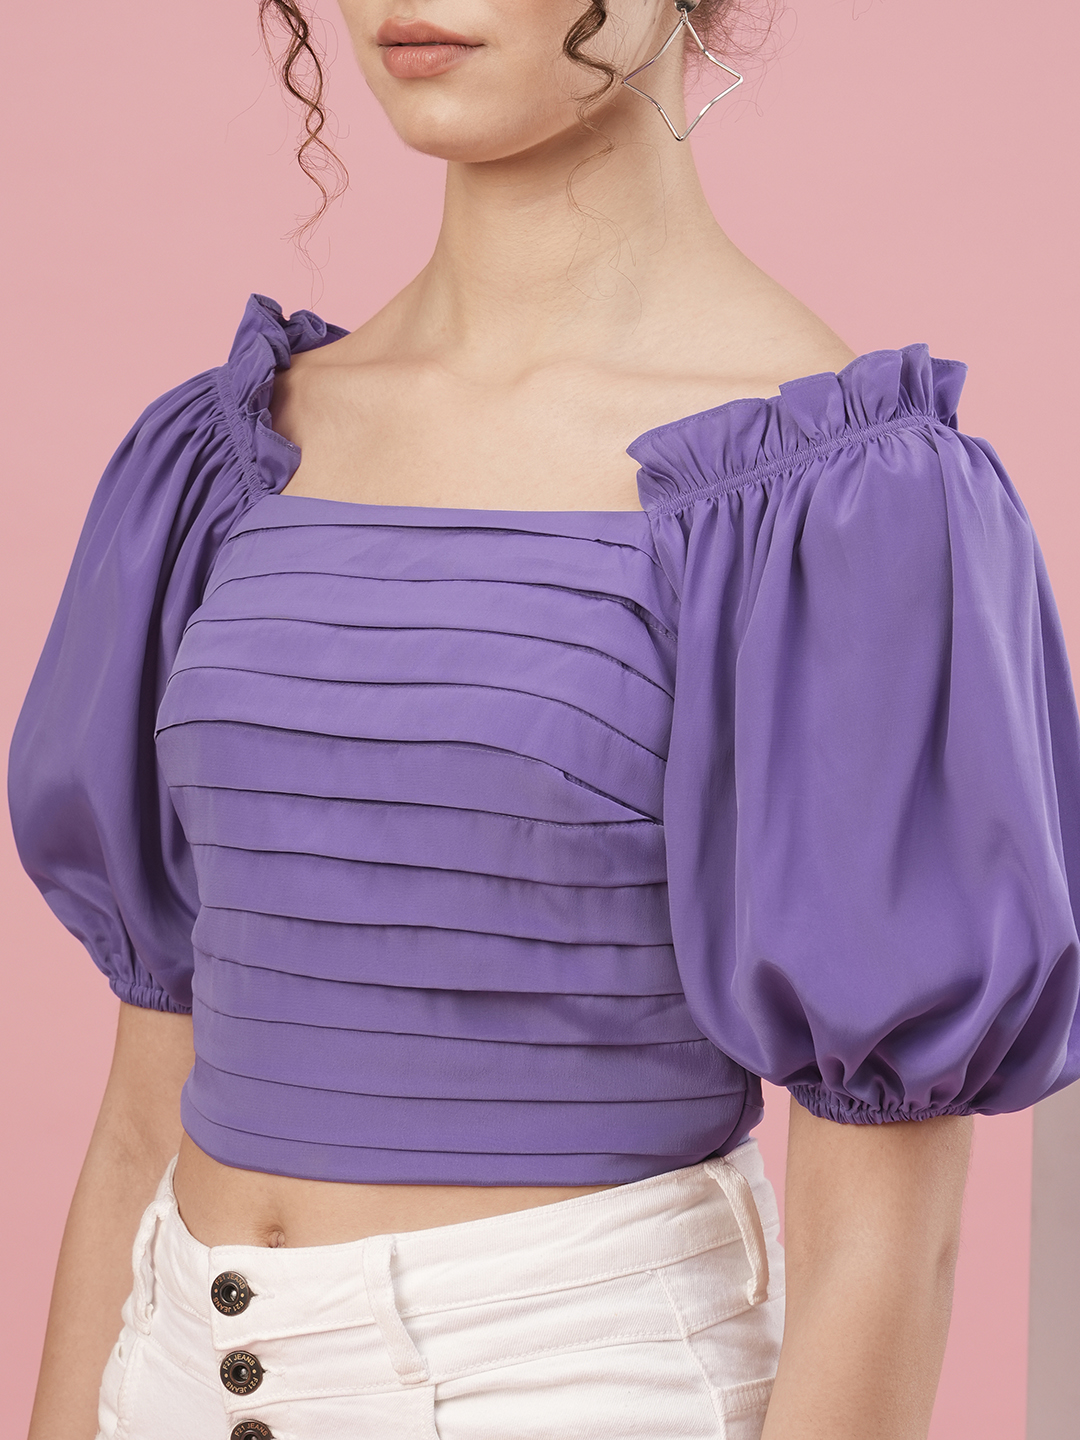 Globus Women Lavender Square Neck Puff Sleeves Gathered Party Top